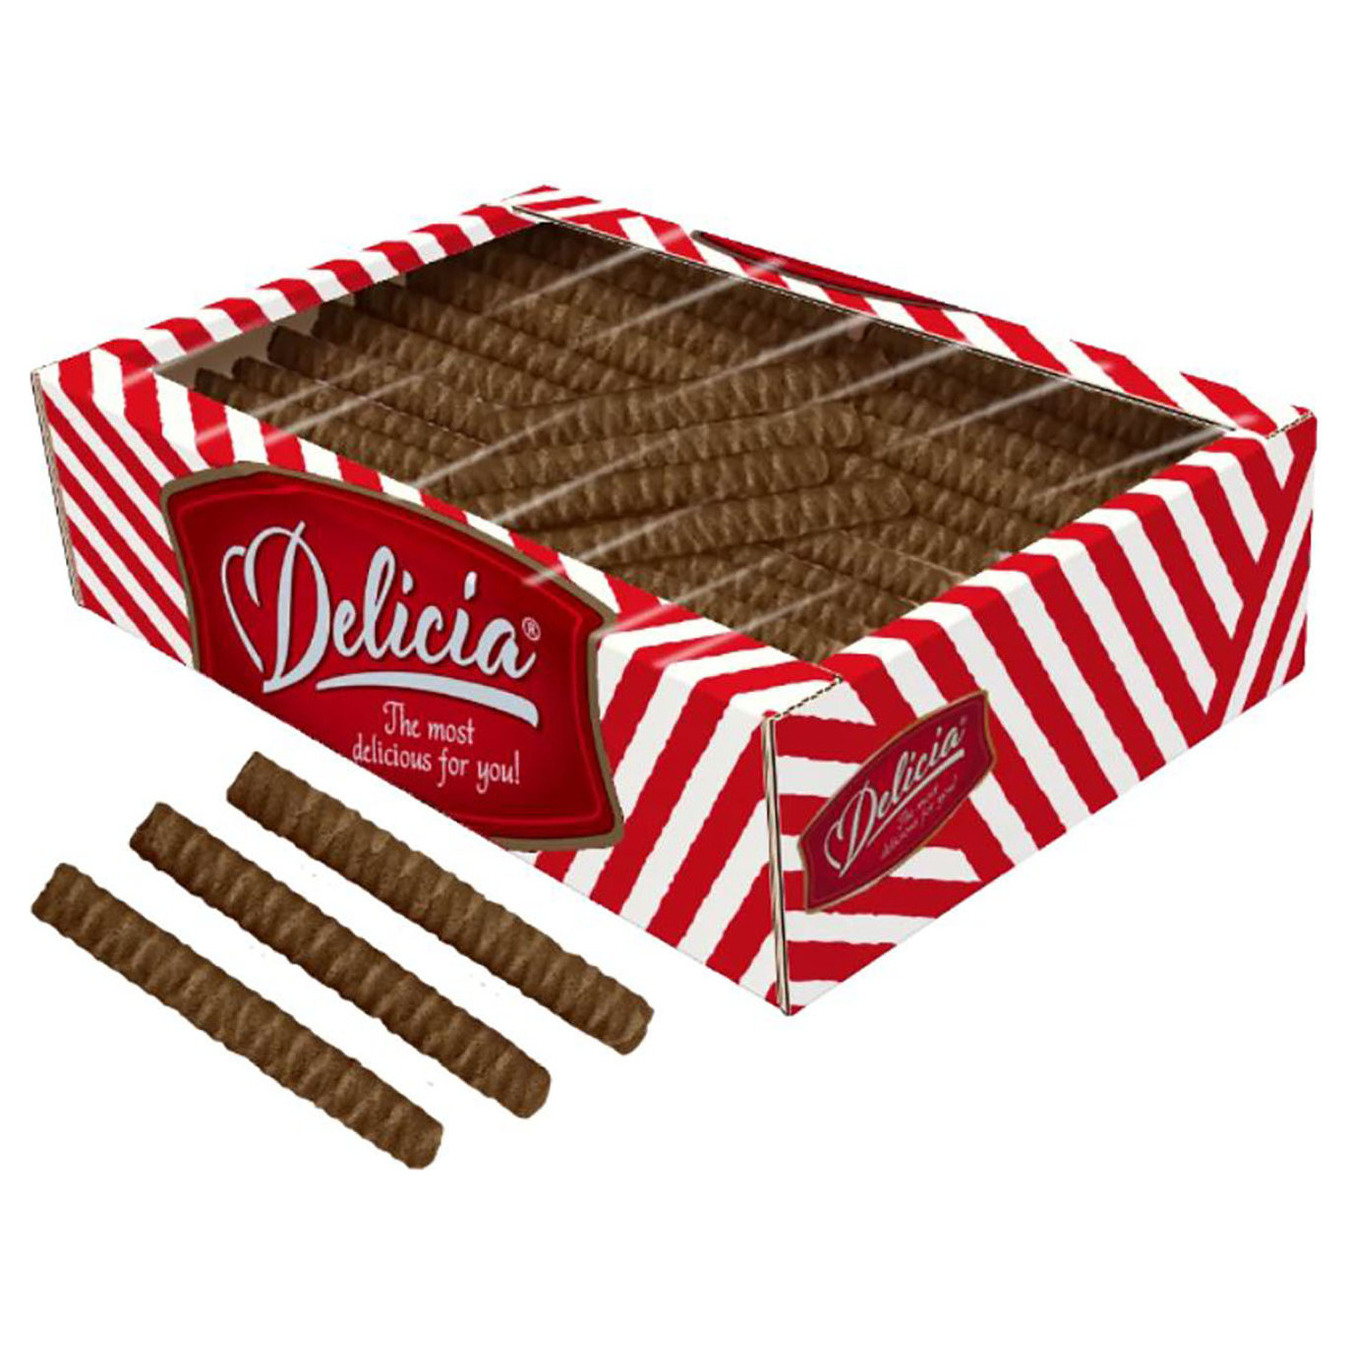 Waffles Delicia tubes with coconut flavor 2